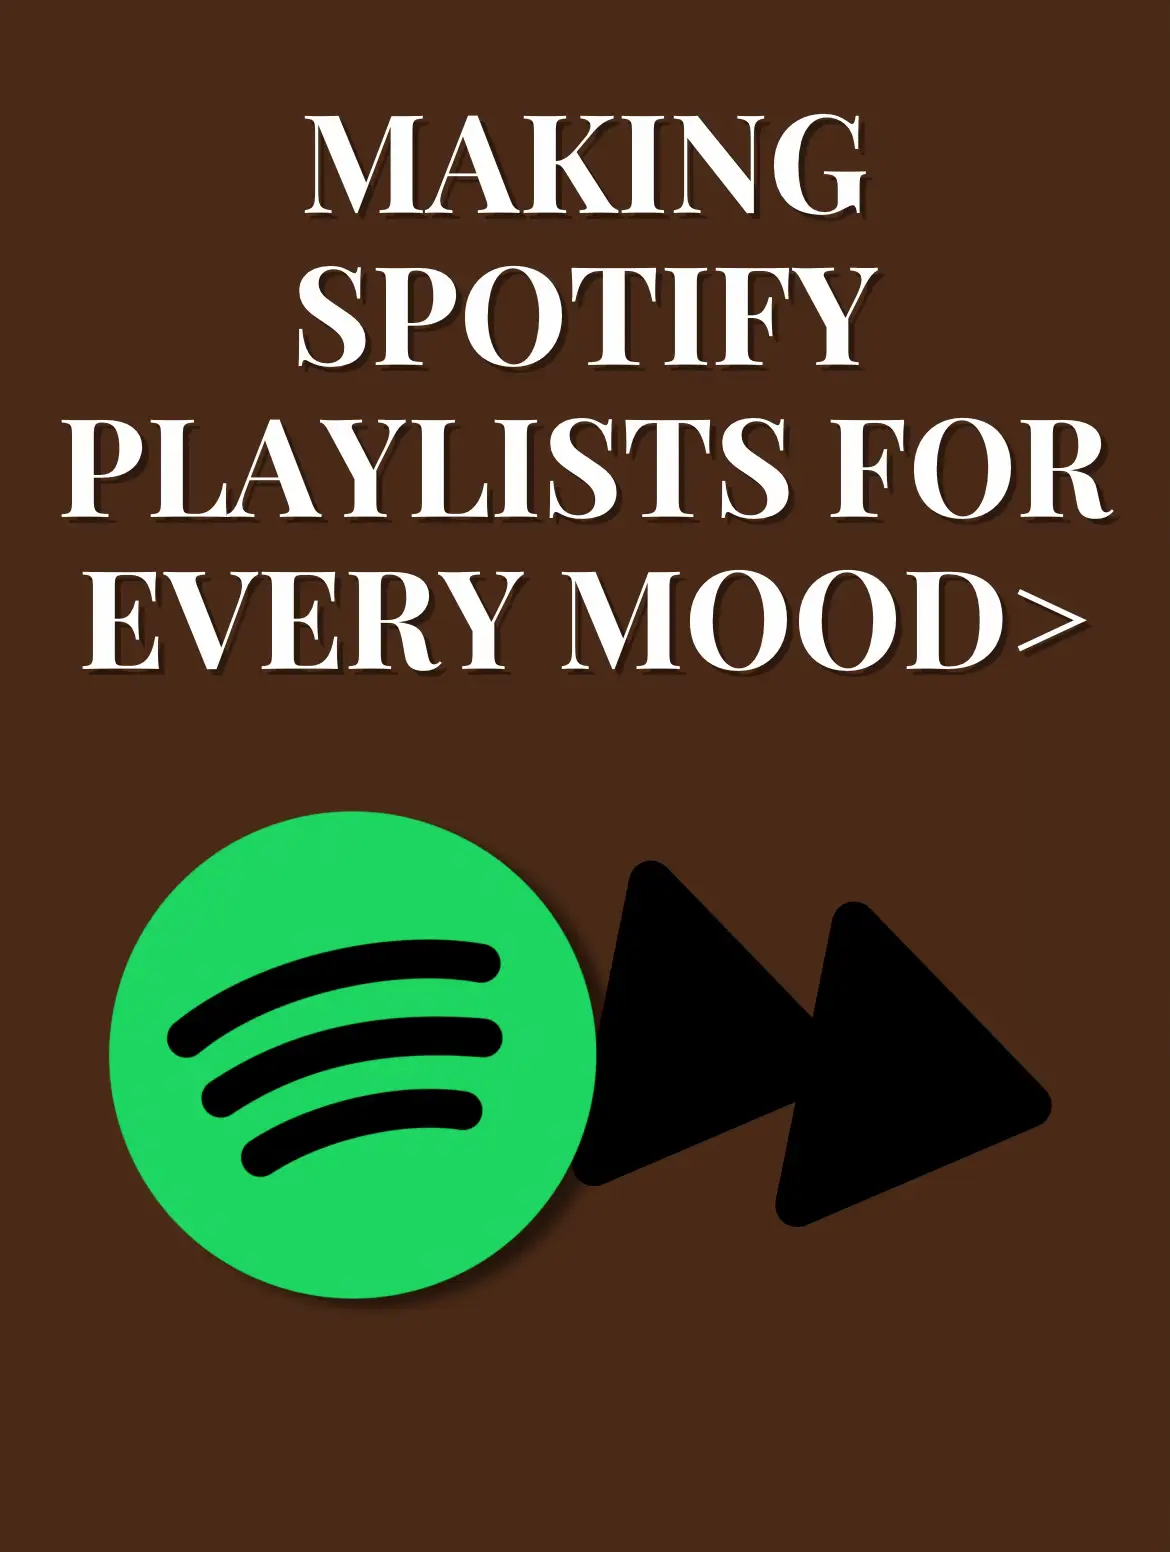 SPOTIFY PLAYLISTS FOR EVERY MOOD>>'s images